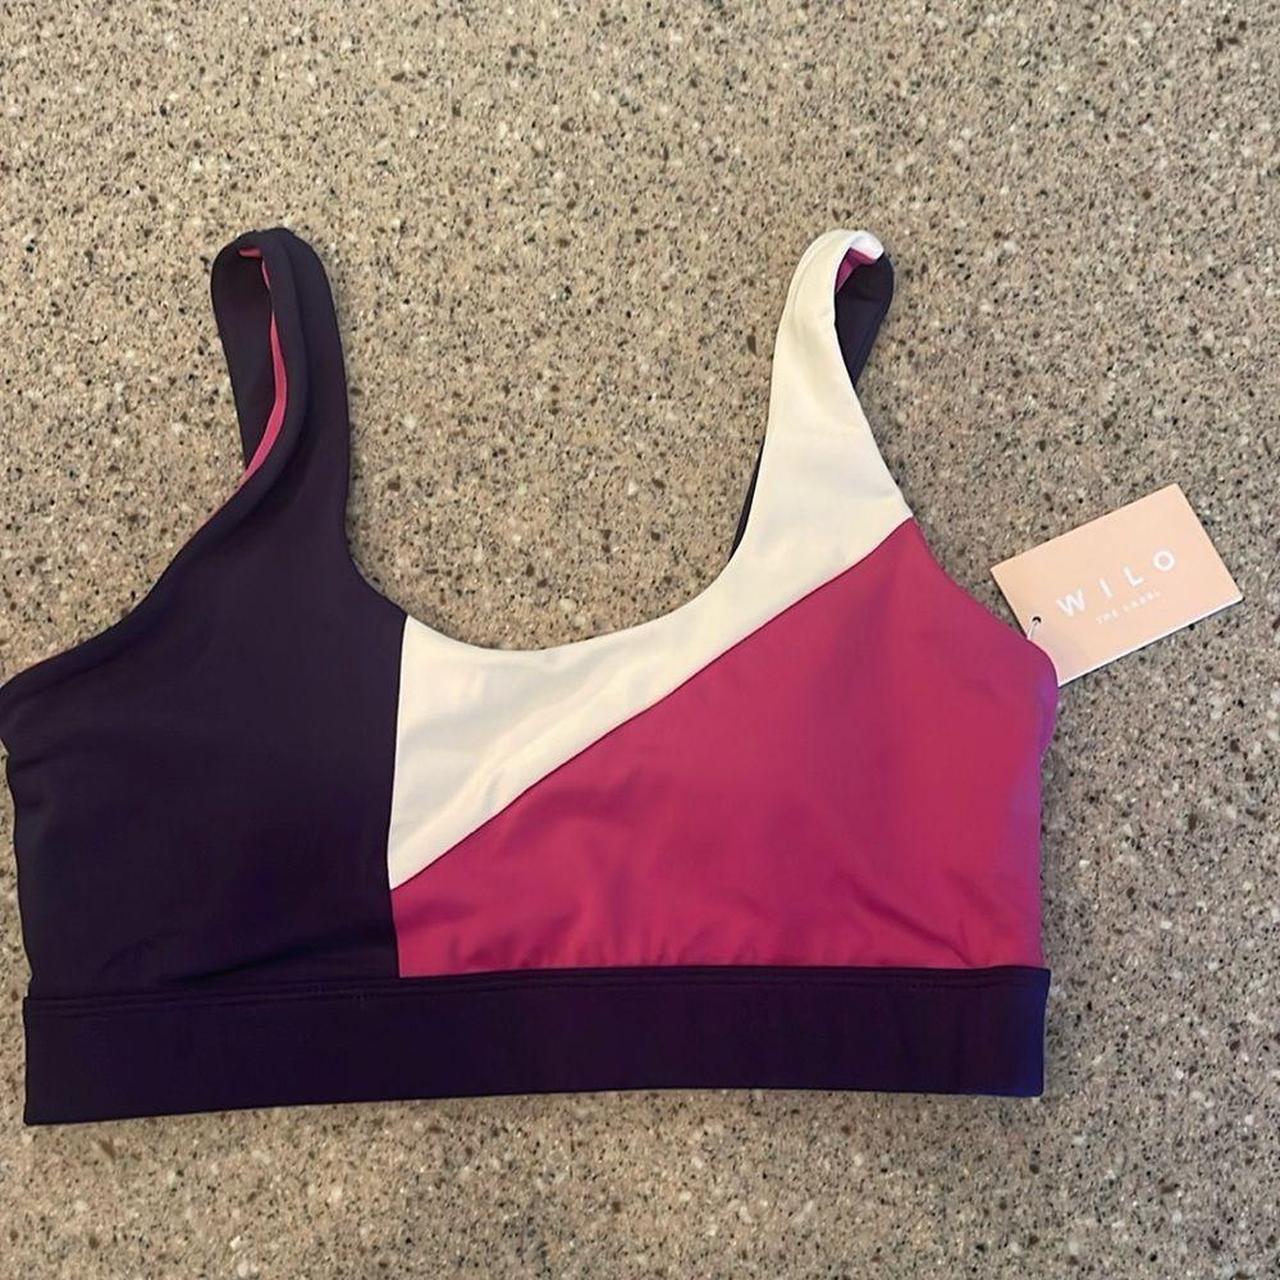 Wilo Activewear Two Piece Pink Ribbed Set - $60 (43% Off Retail) New With  Tags - From Sophia